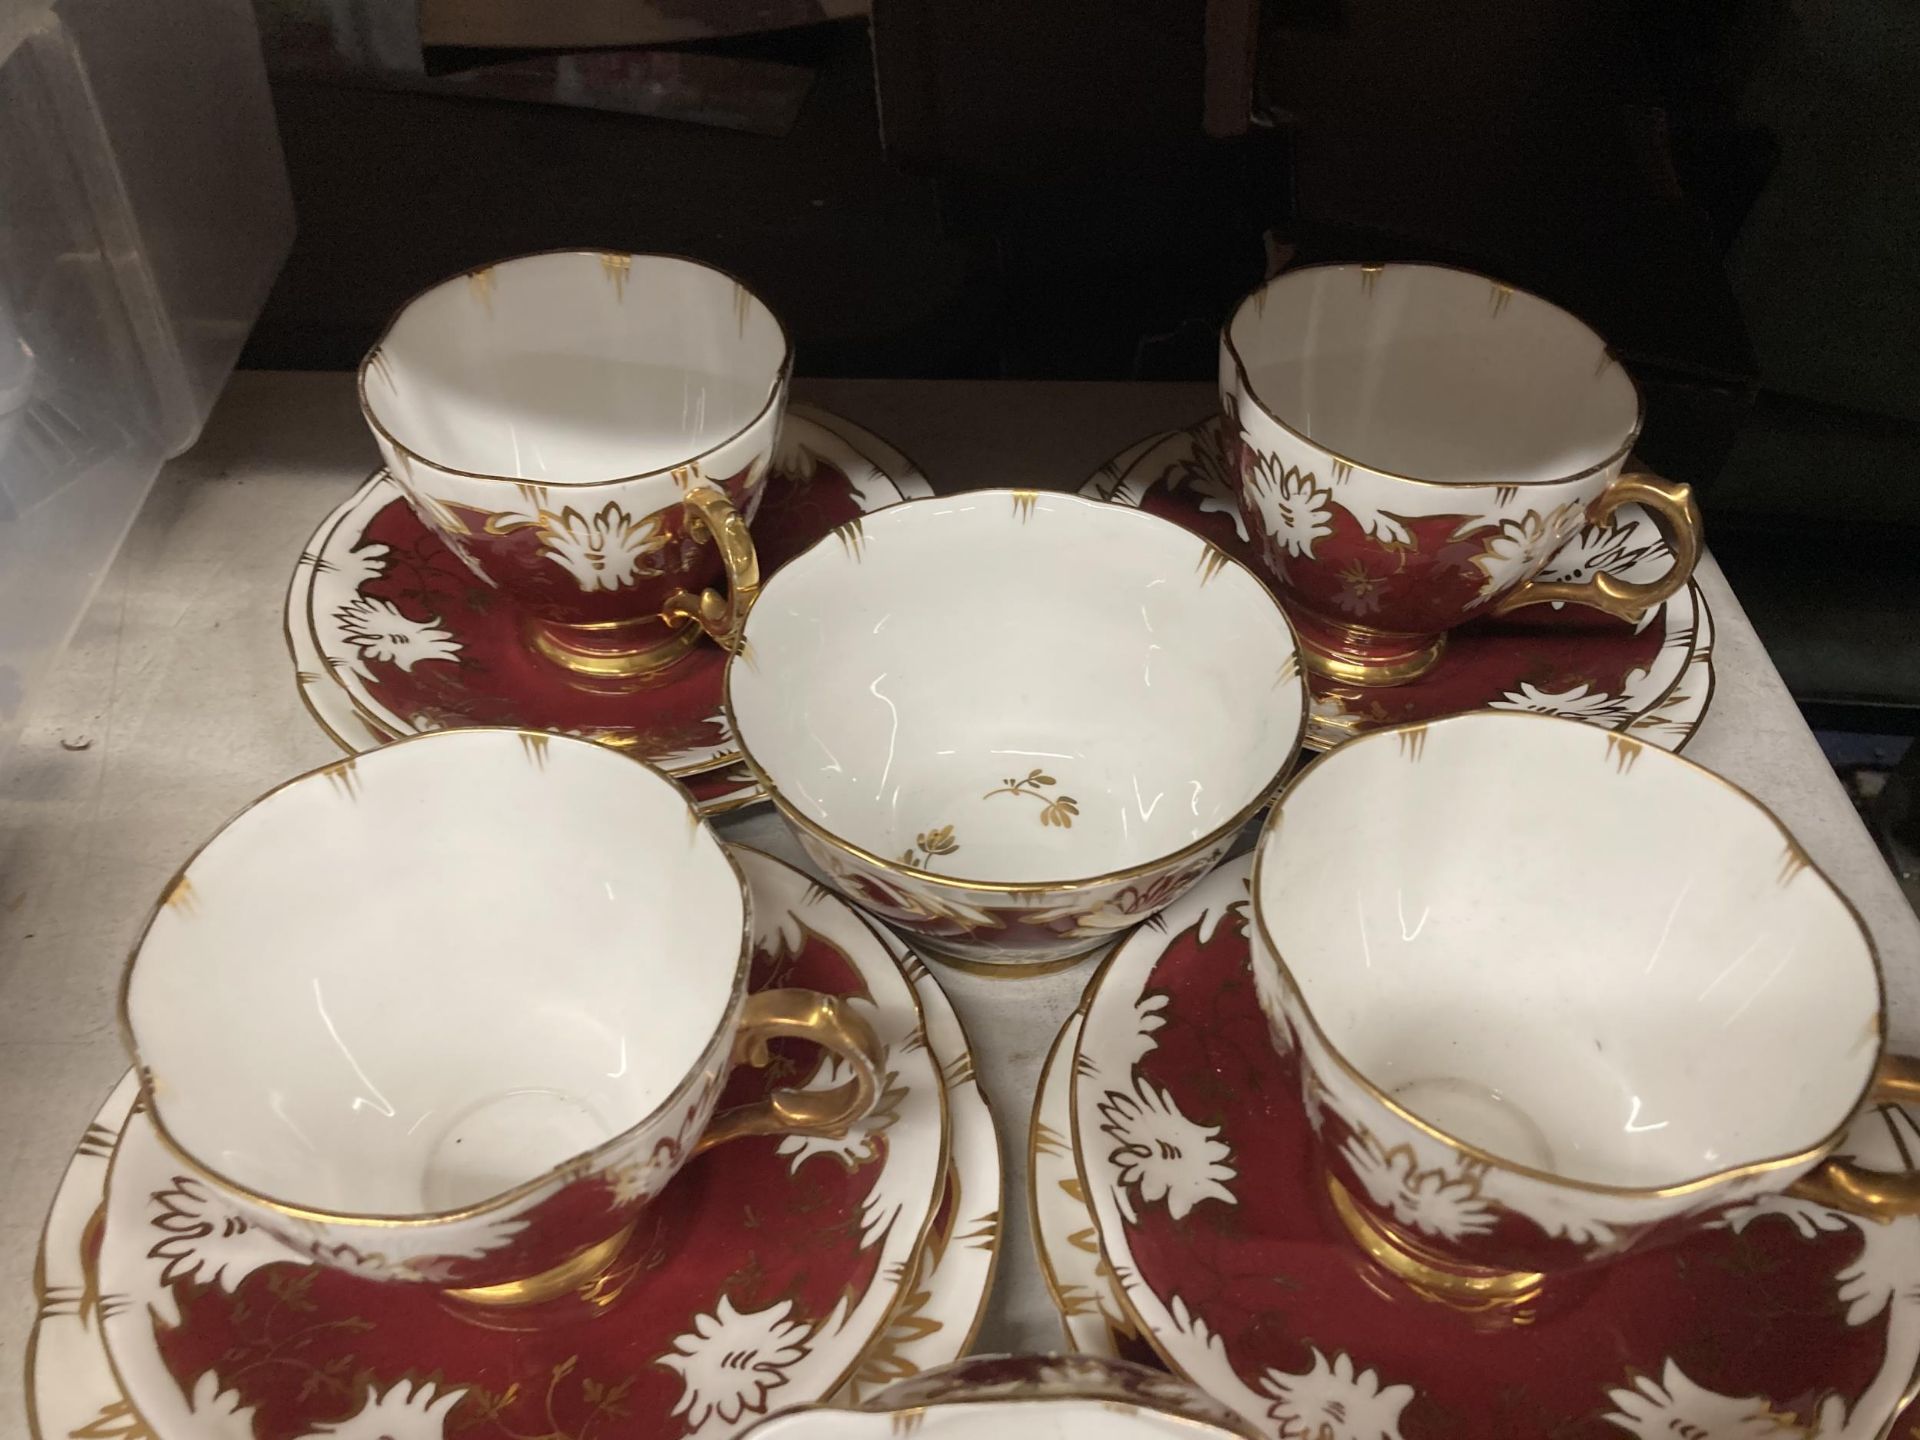 A VINTAGE ROYAL STUART CHINA PART TEASET TO INCLUDE A CAKE PLATE, CREAM JUG, SUGAR BOWL, CUPS, - Image 4 of 5